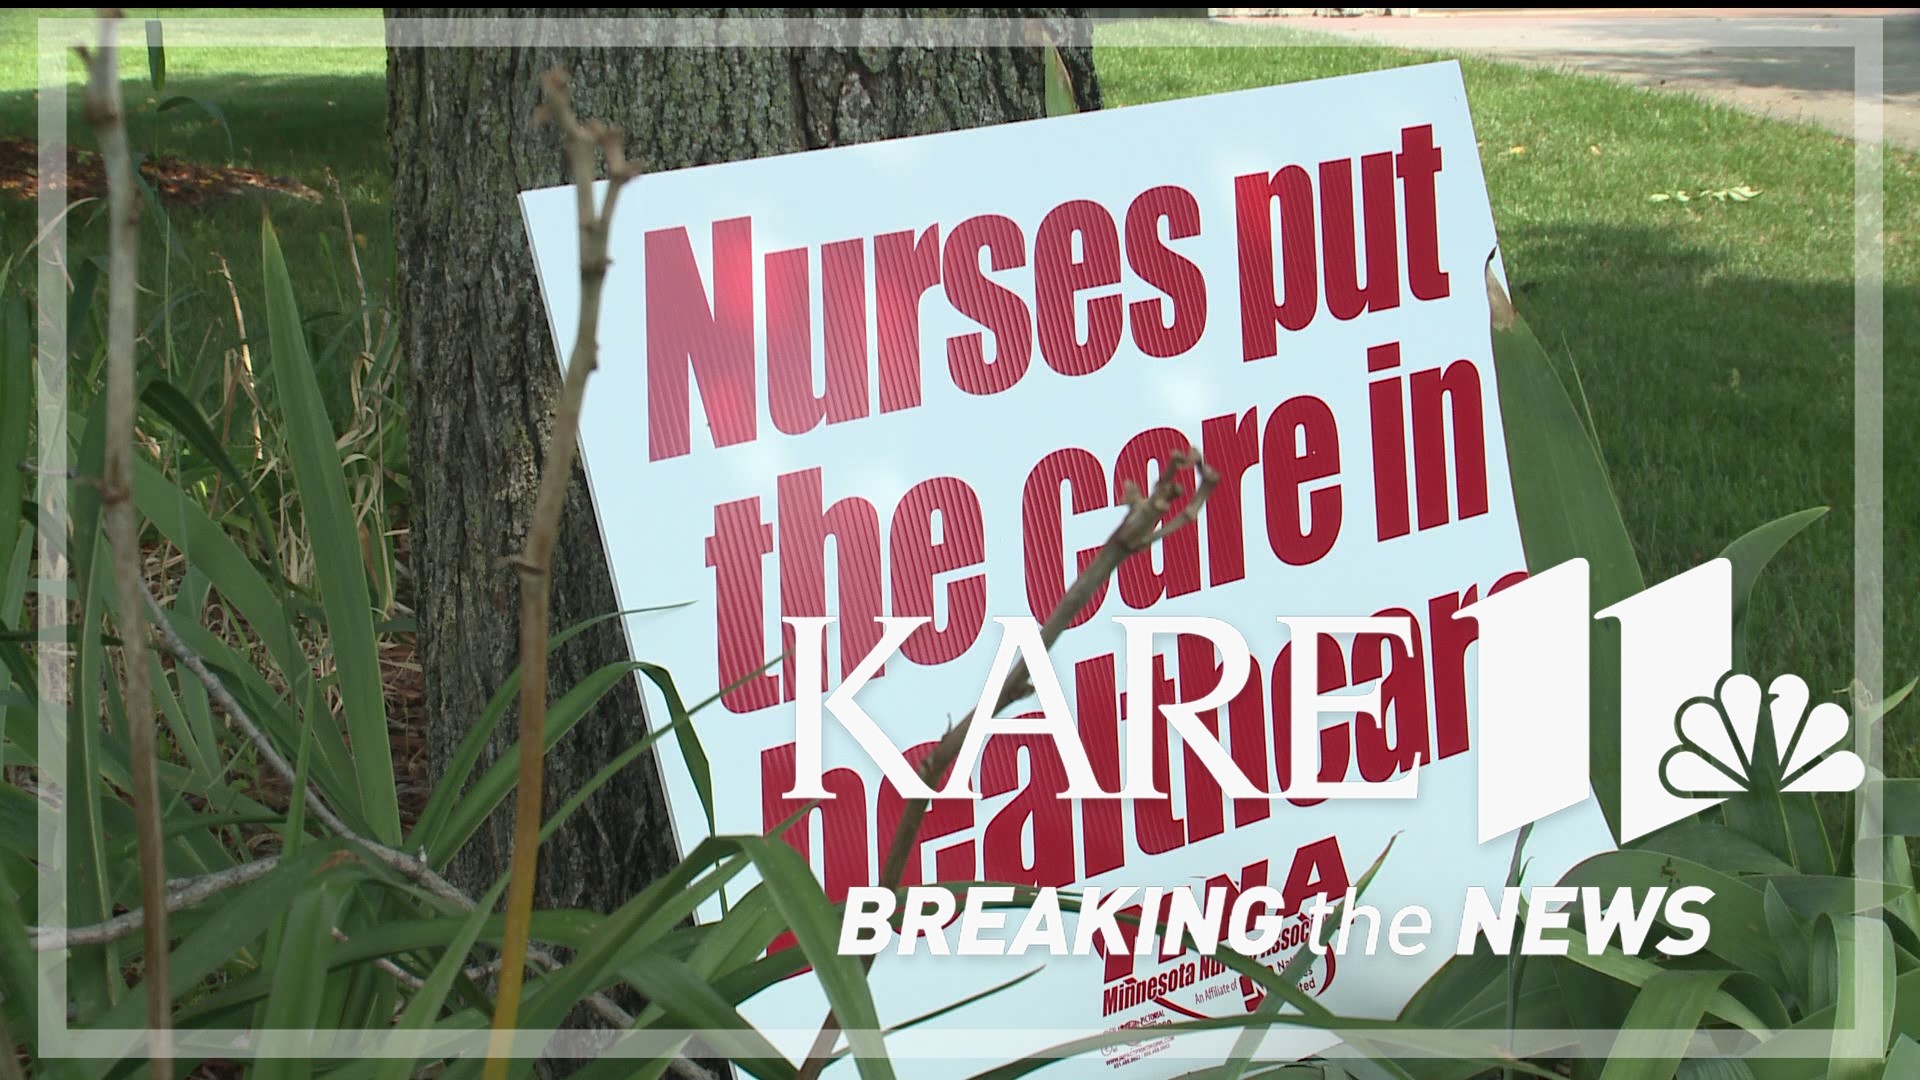 The staffing issue, according to nurses, is where the dollars need to go.